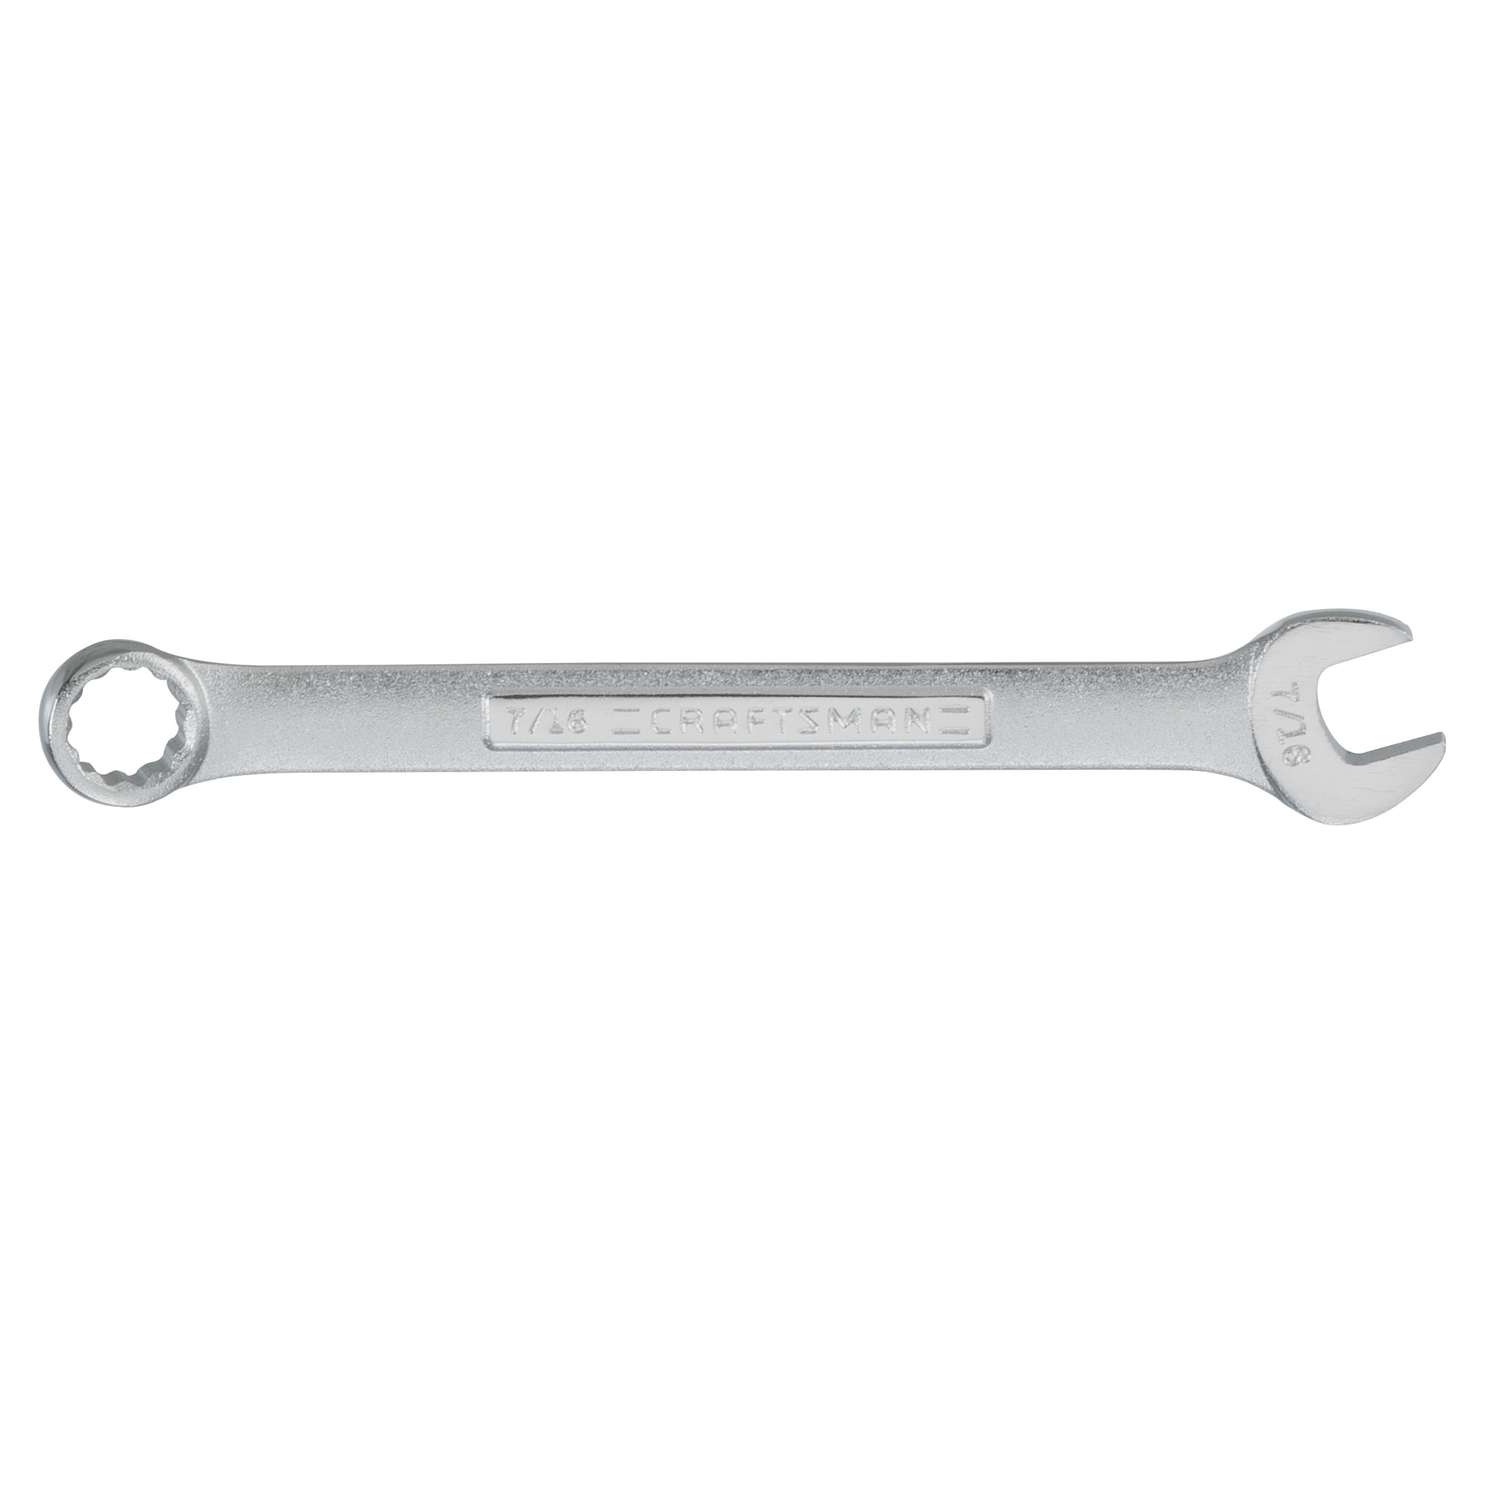 1-5/8 Combination Wrench HHIP 7023-1025